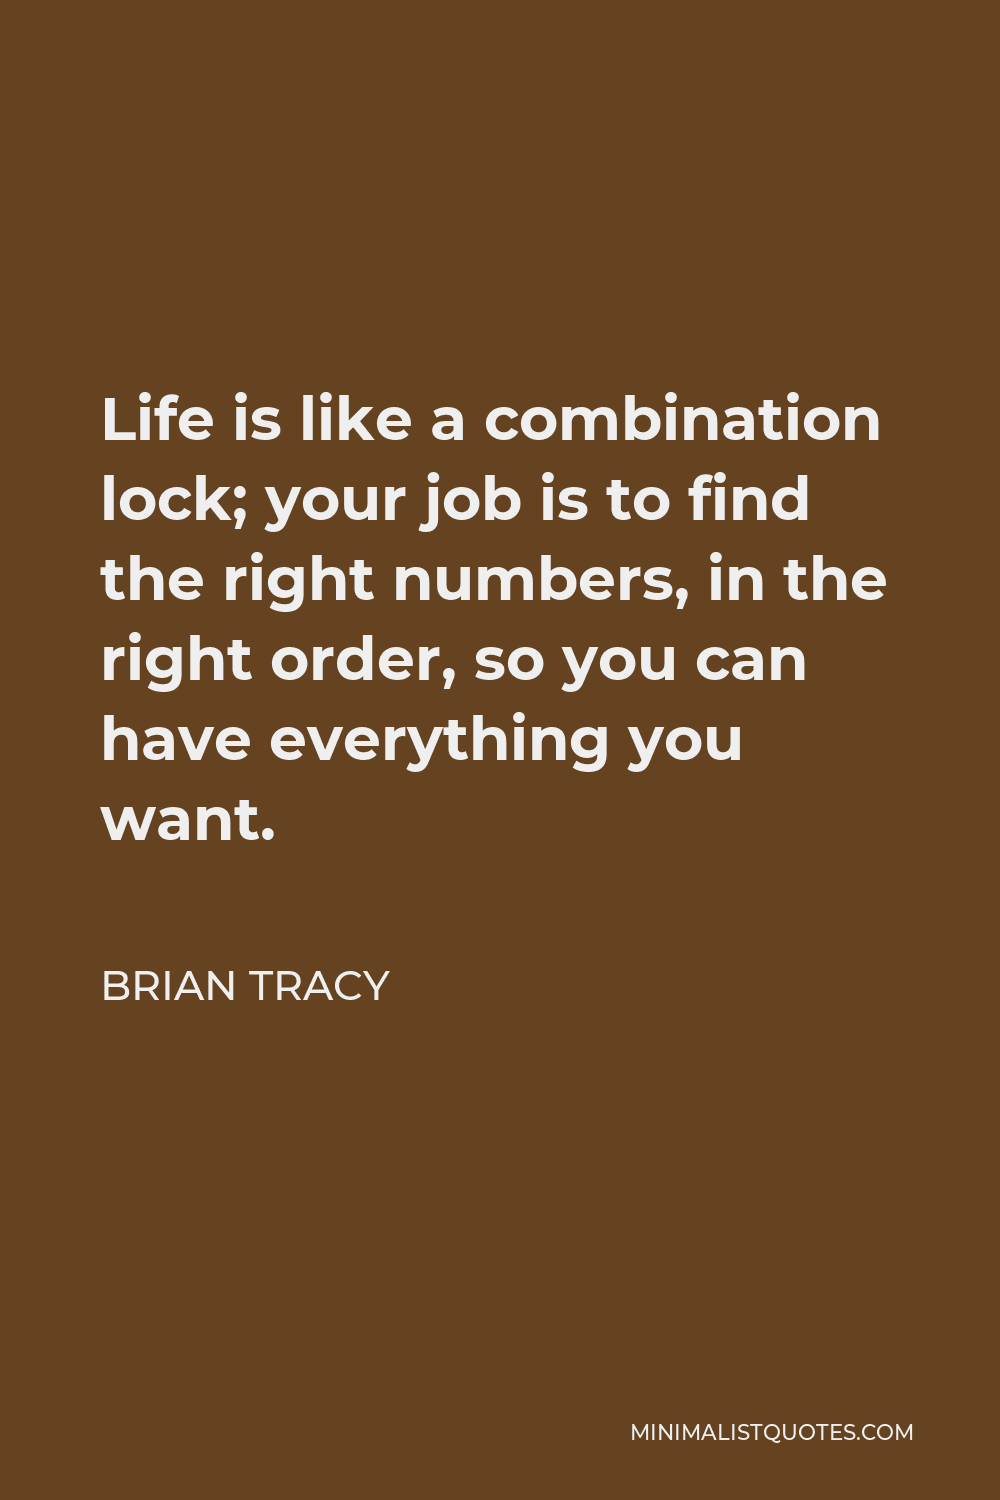 Brian Tracy Quote - Life is like a combination lock; your job is to find the right numbers, in the right order, so you can have everything you want.